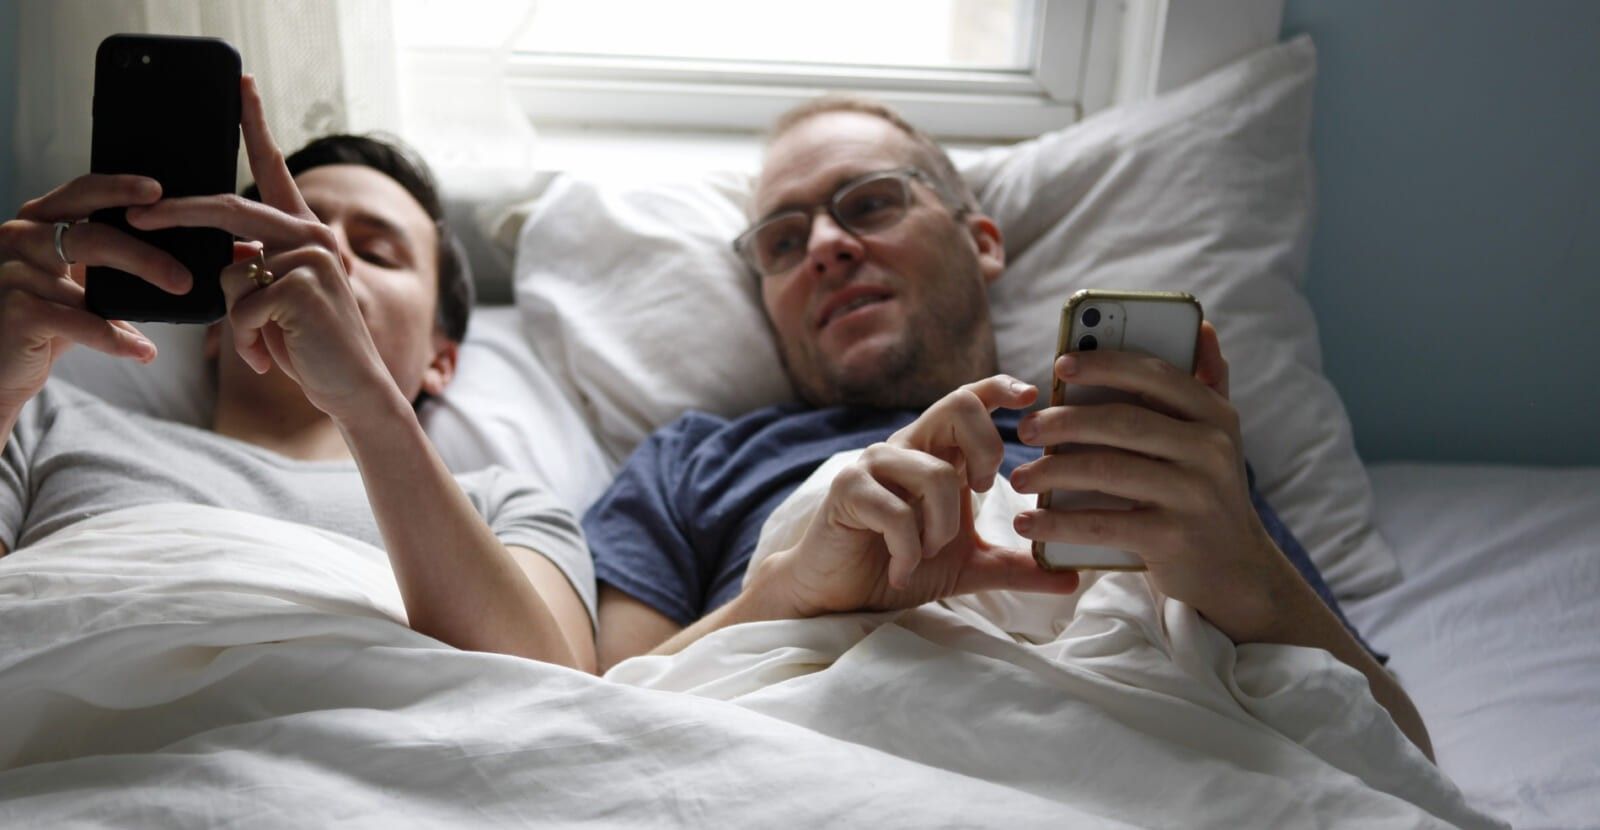 Two men in bed, side by side, looking at mobile phones